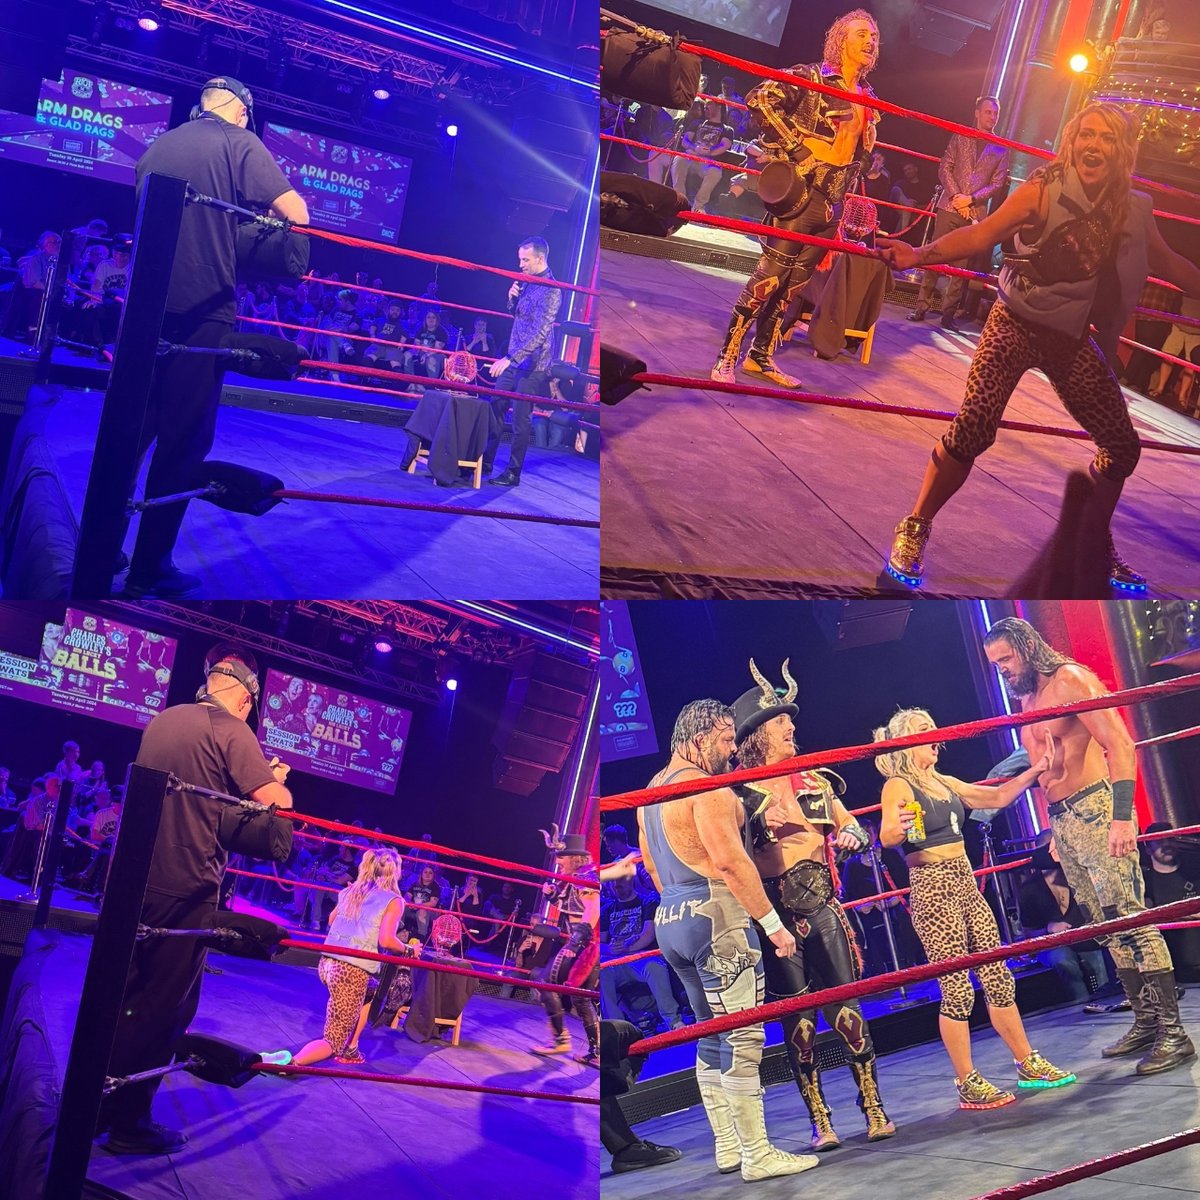 It’s time for @charlescrowley Big Lucky Balls here at @RiotCabaret in Clapham Grand. 

@mothfromdaflats has assisted the draw. @bullitbenno and @mulligan_pro have been drawn as the opponents. That’s just bad luck. 

#ArmDragsAndGladRags